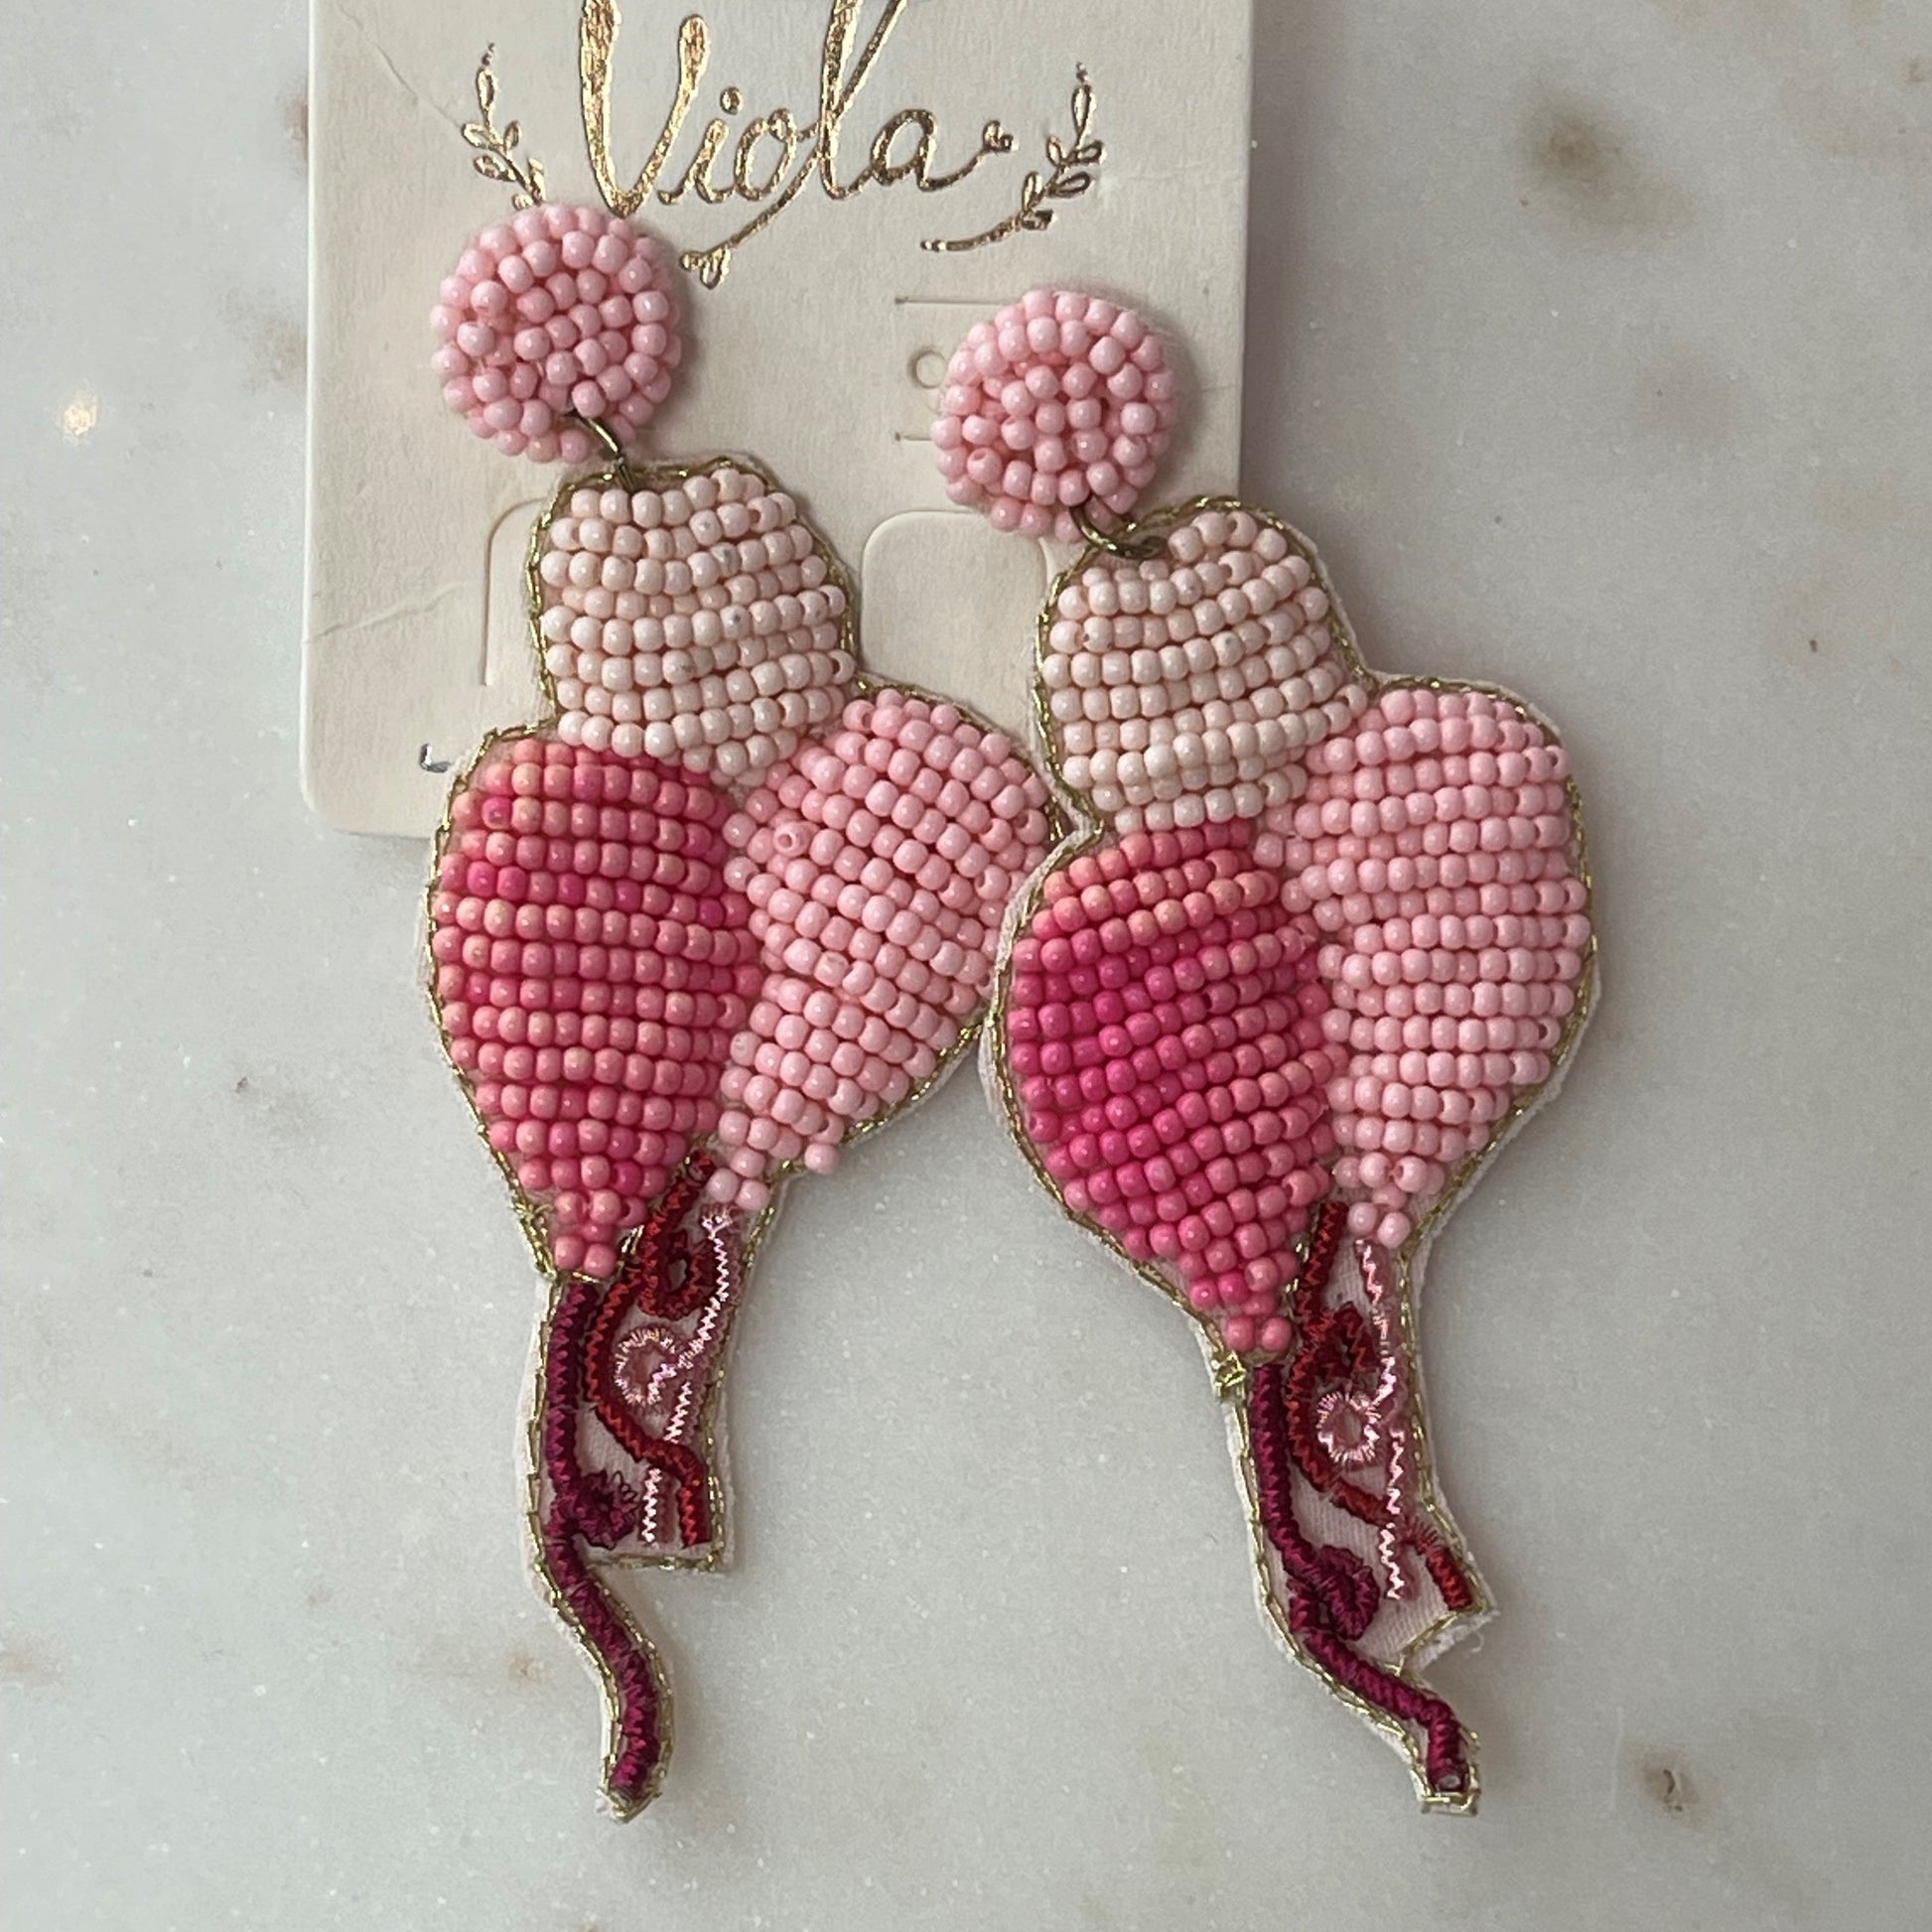 Beaded Balloon Earrings - Pink, Dark Pink and Light Pink